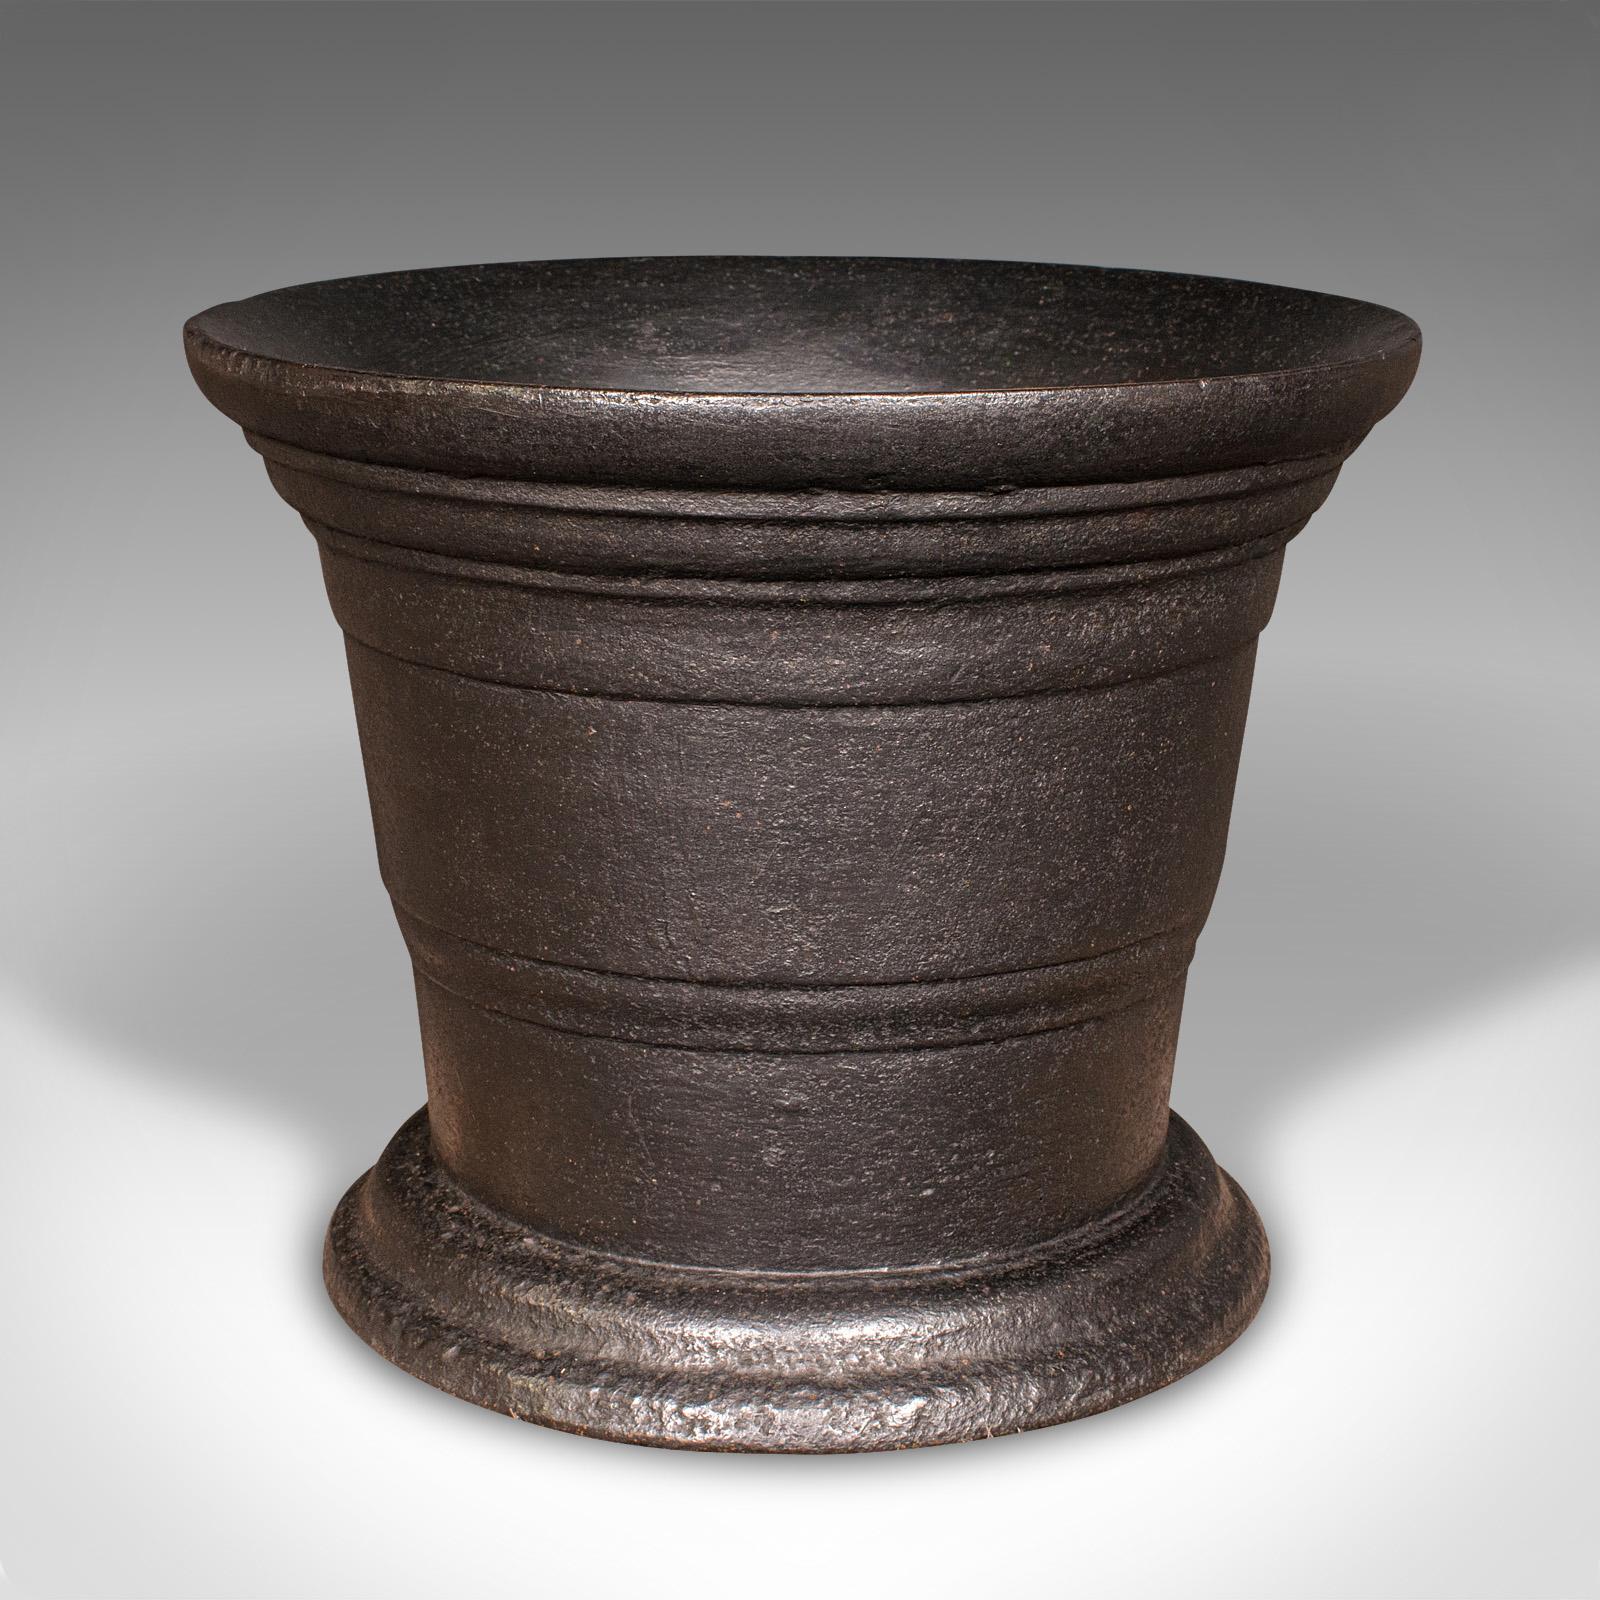 This is a large and heavy antique industrial mortar. An English, cast iron factory fireside bin or basket, dating to the Georgian period, circa 1750.

Exceptionally substantial mortar, versatile within the modern home
Displays a desirable aged